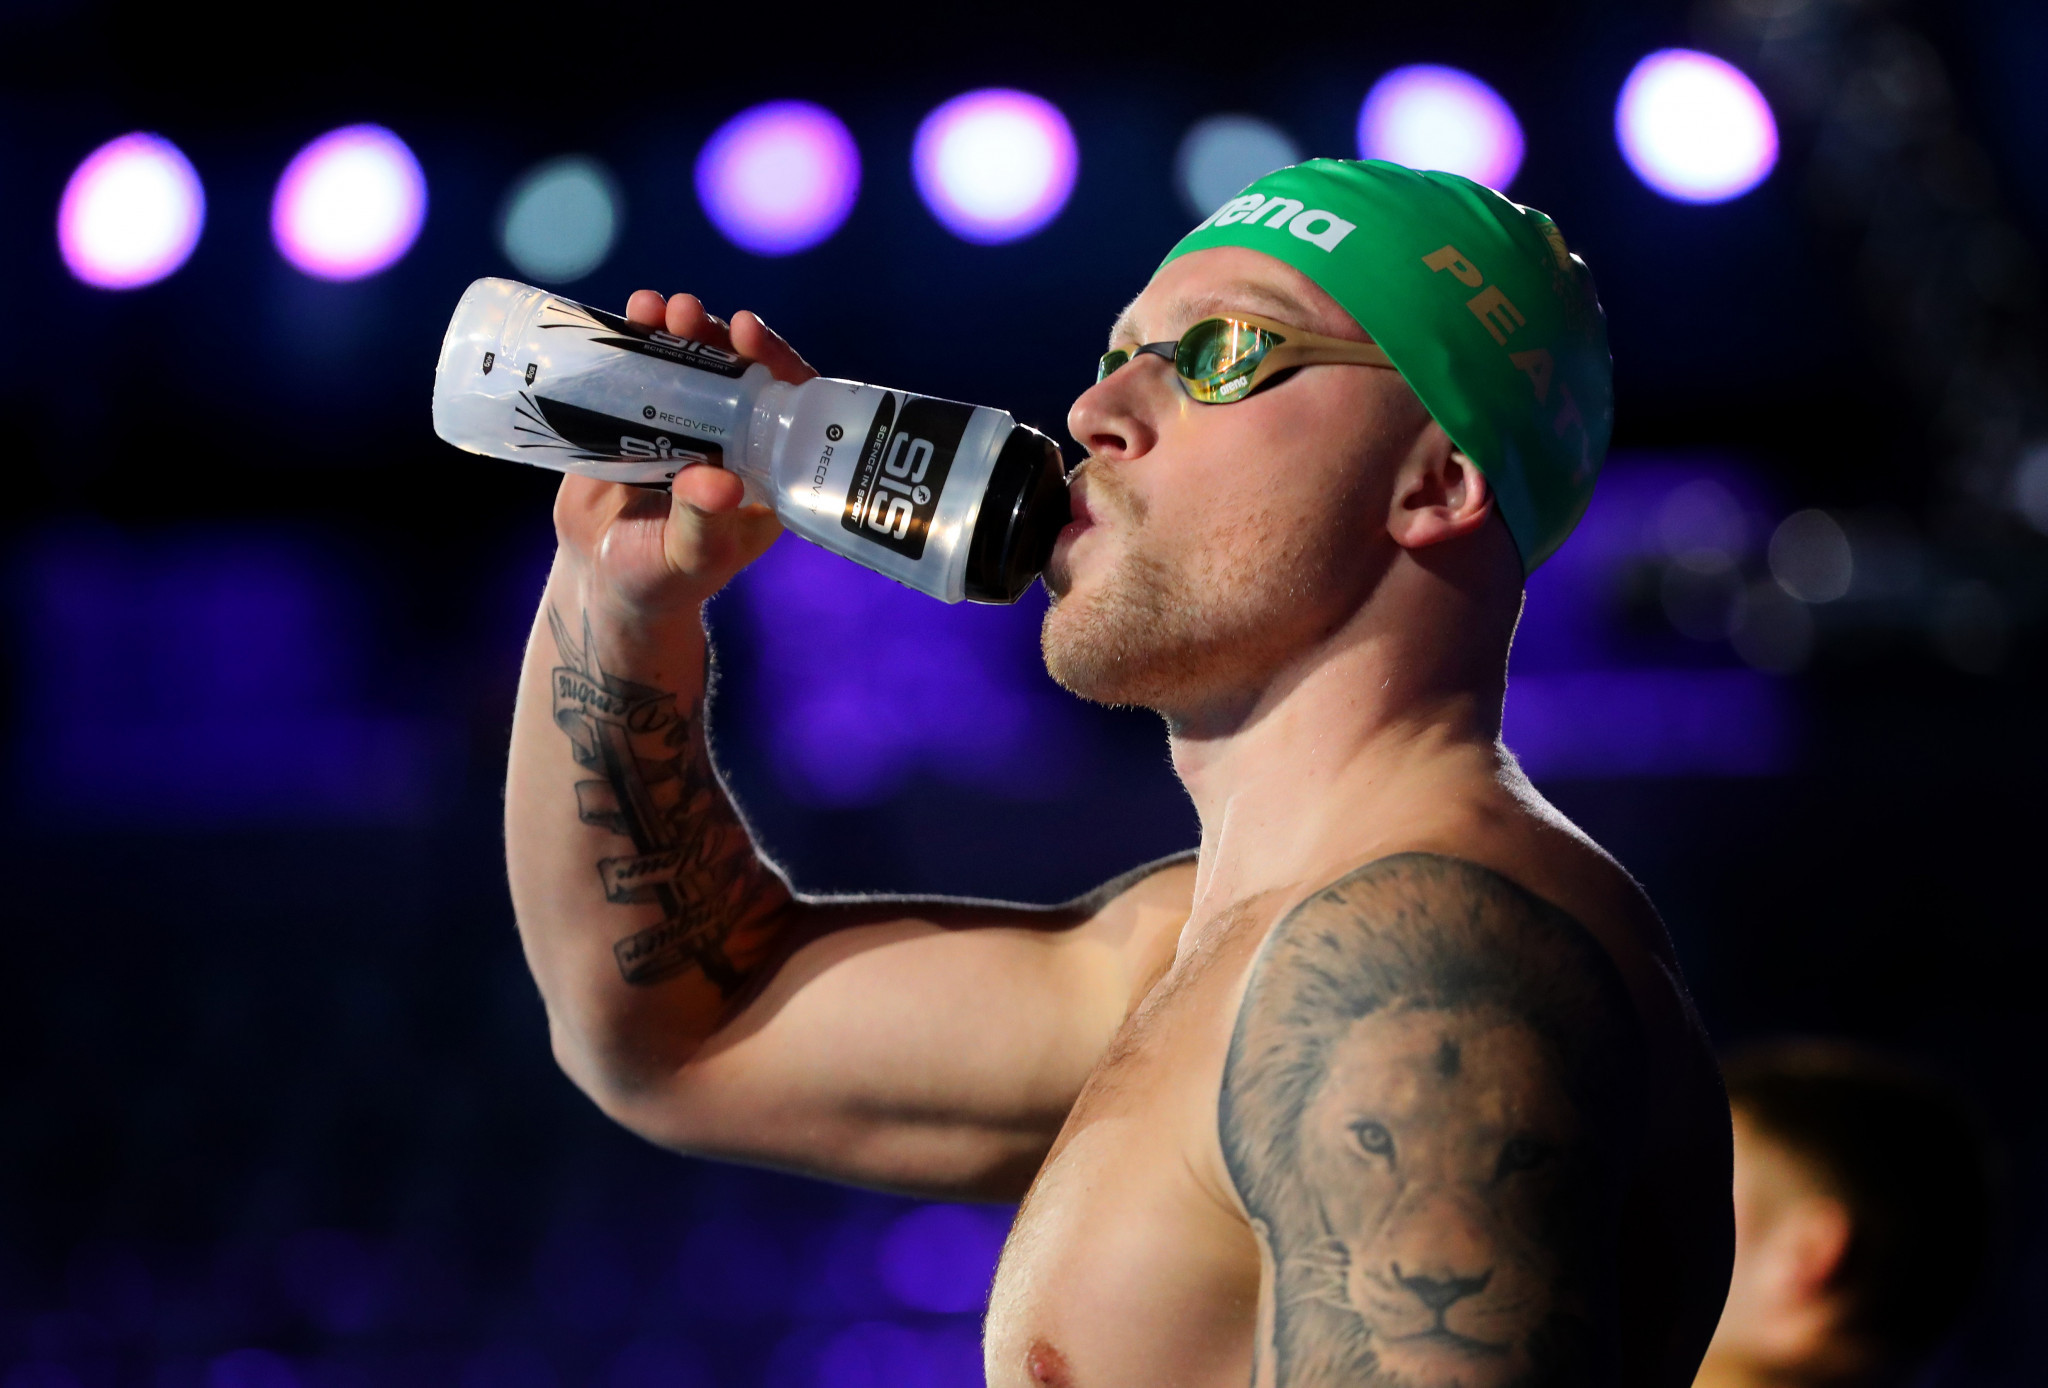 Swimmer Adam Peaty believes next year's Olympic Games will be held in a "bubble" in Tokyo ©Getty Images